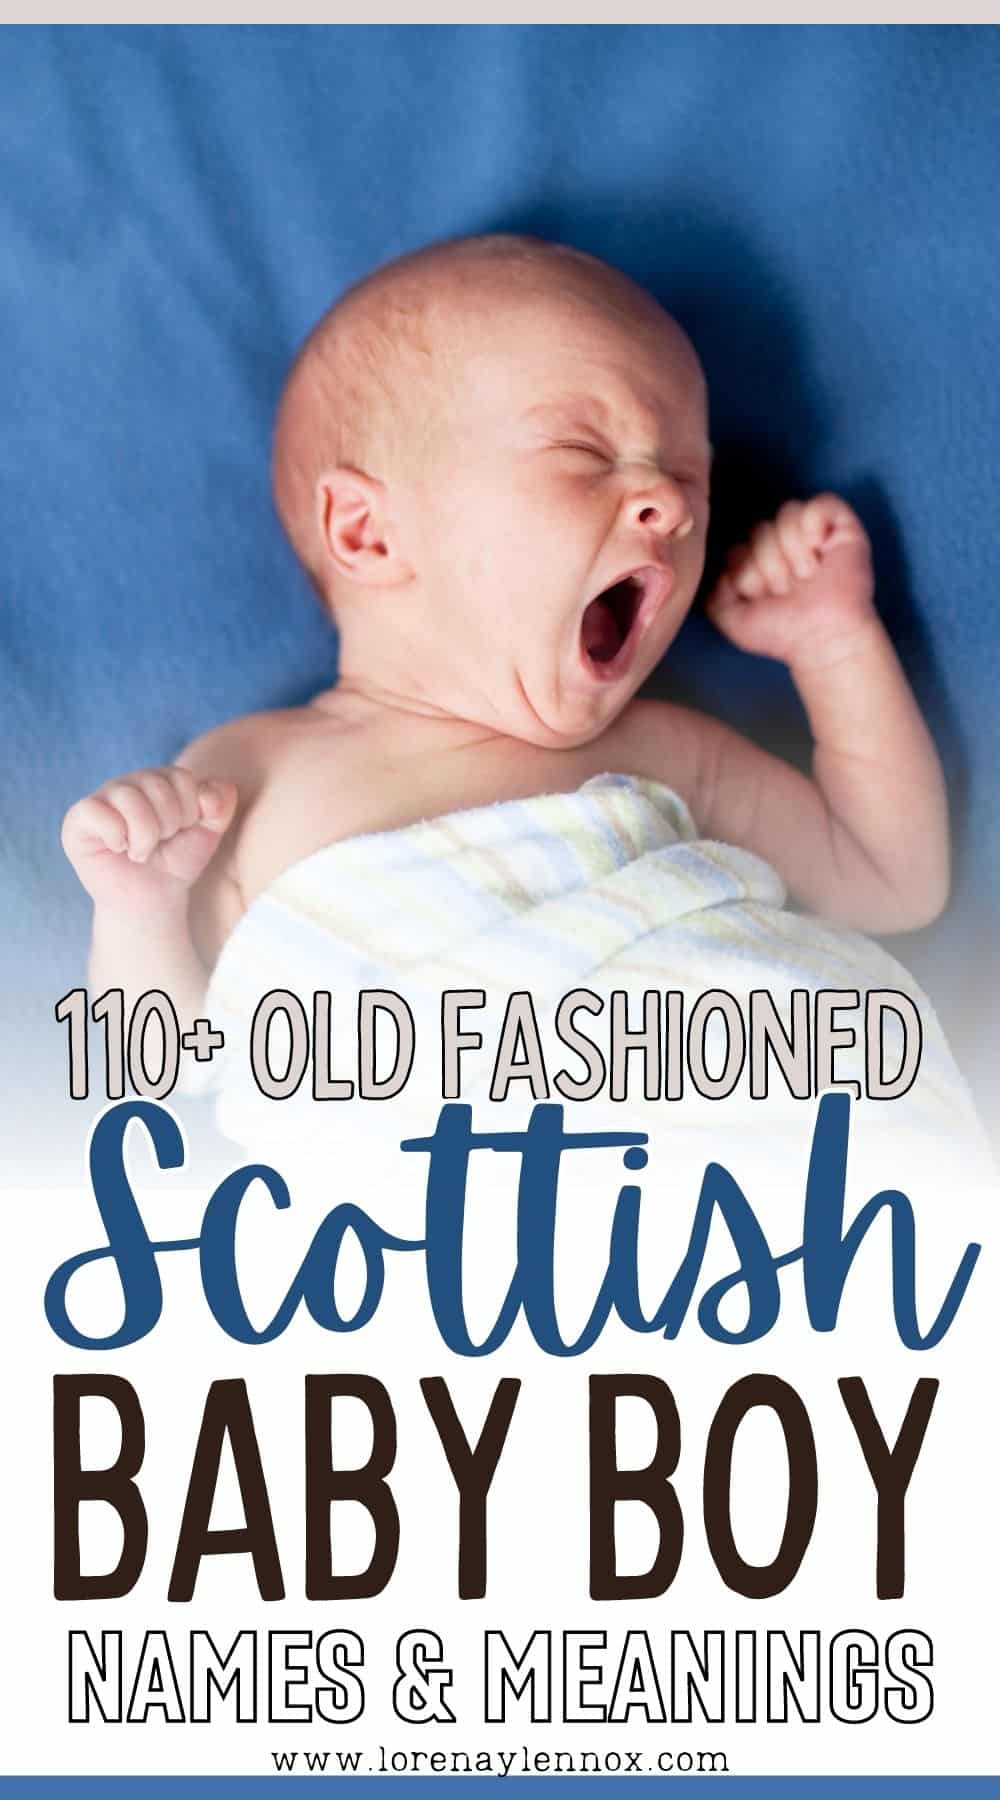 Discover a diverse collection of 110 Scottish baby boy names that are sure to captivate you. From traditional Gaelic names to unique and charming choices, explore the rich cultural heritage and meanings behind each name. Find your favorite Scottish baby boy names and start pinning! #ScottishBabyBoyNames #BabyBoyNames #ScottishNames